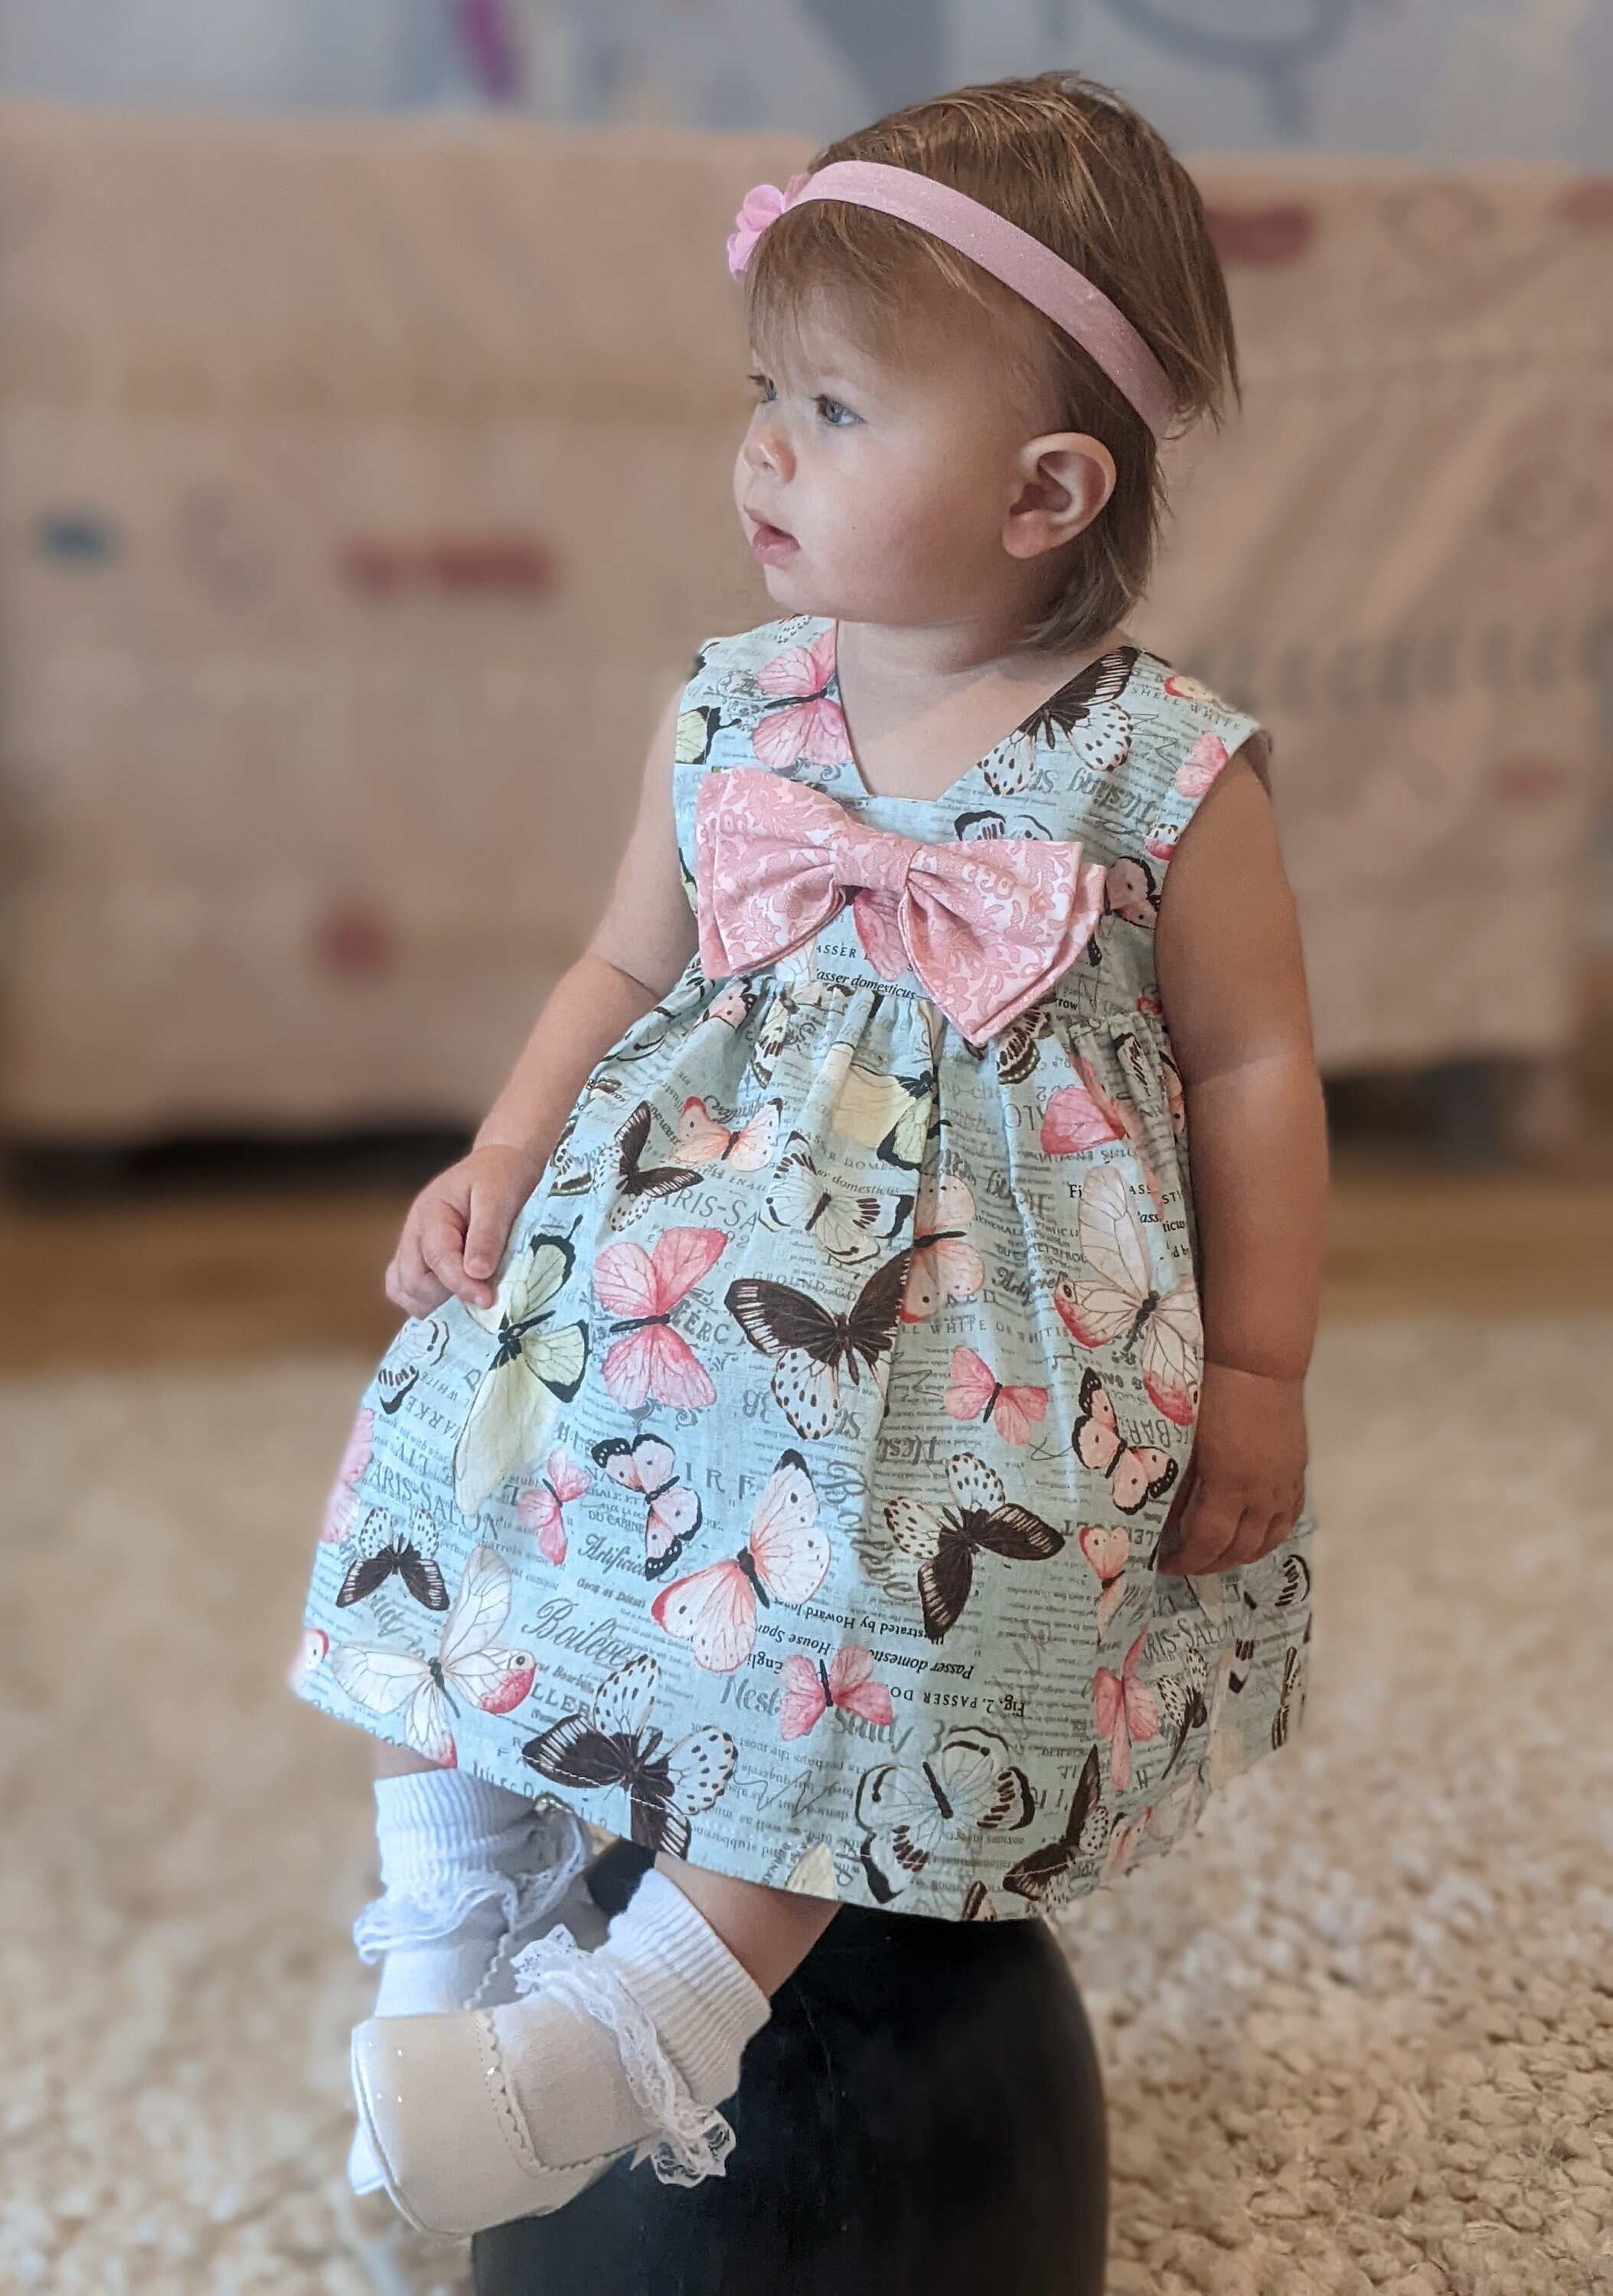 baby easter dress